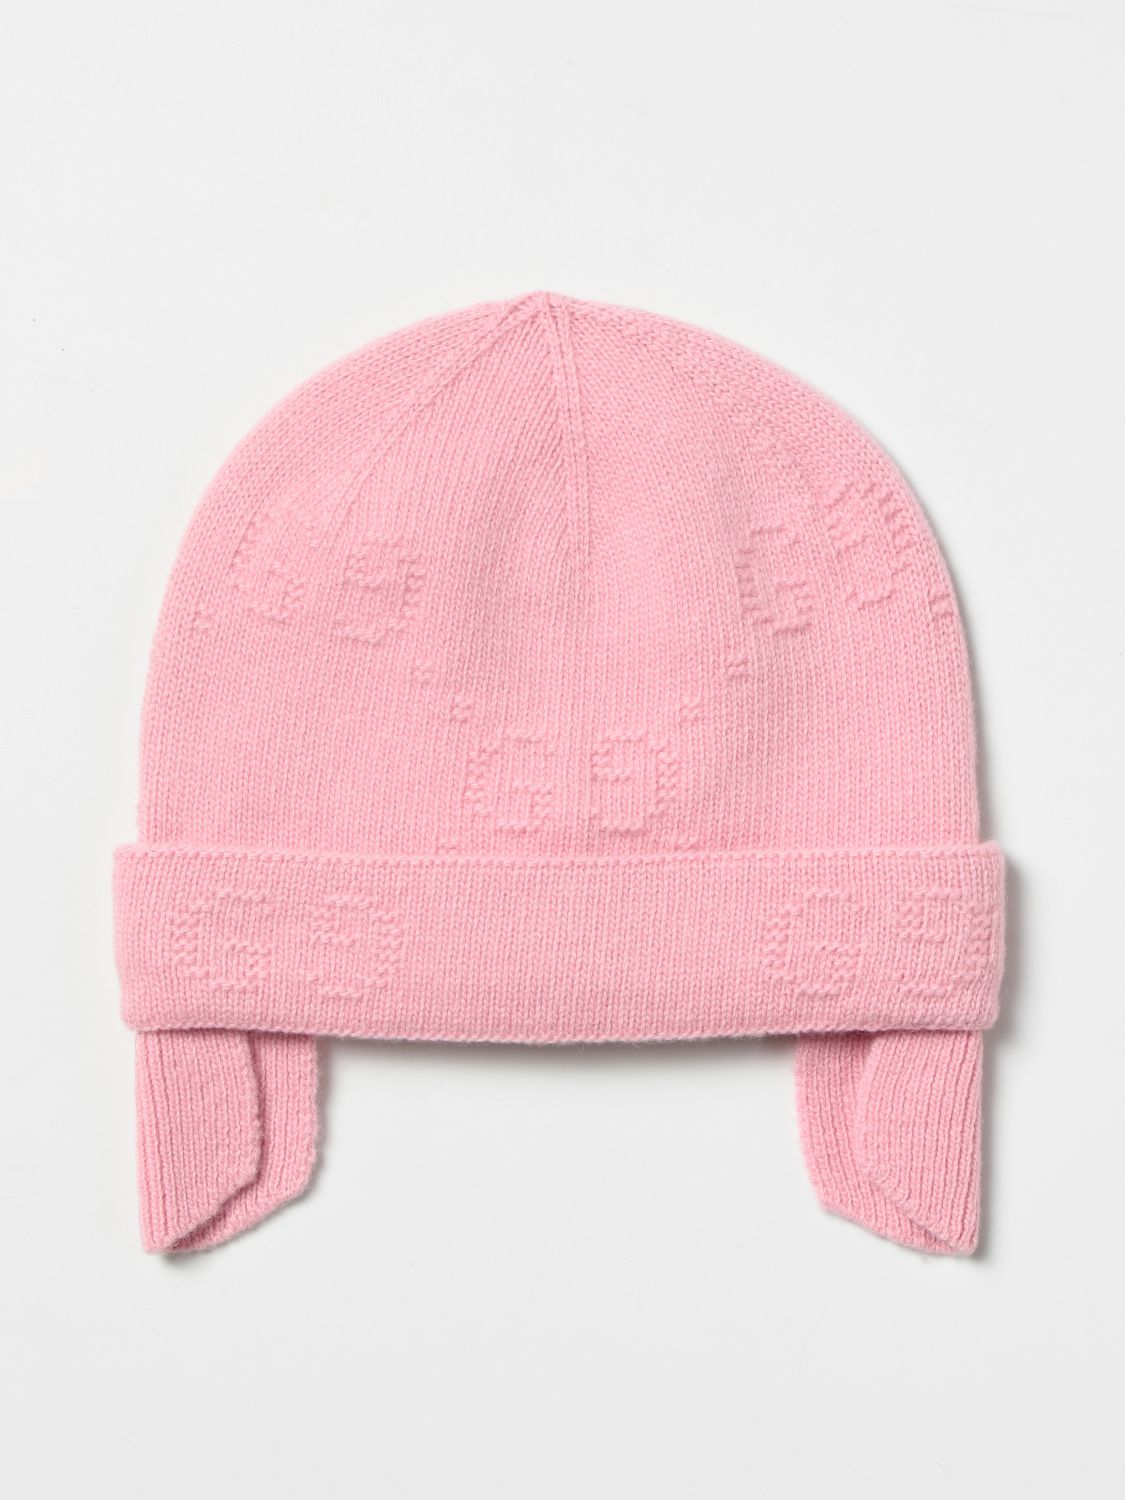 Hat Gucci: Gucci hat for kids pink 1